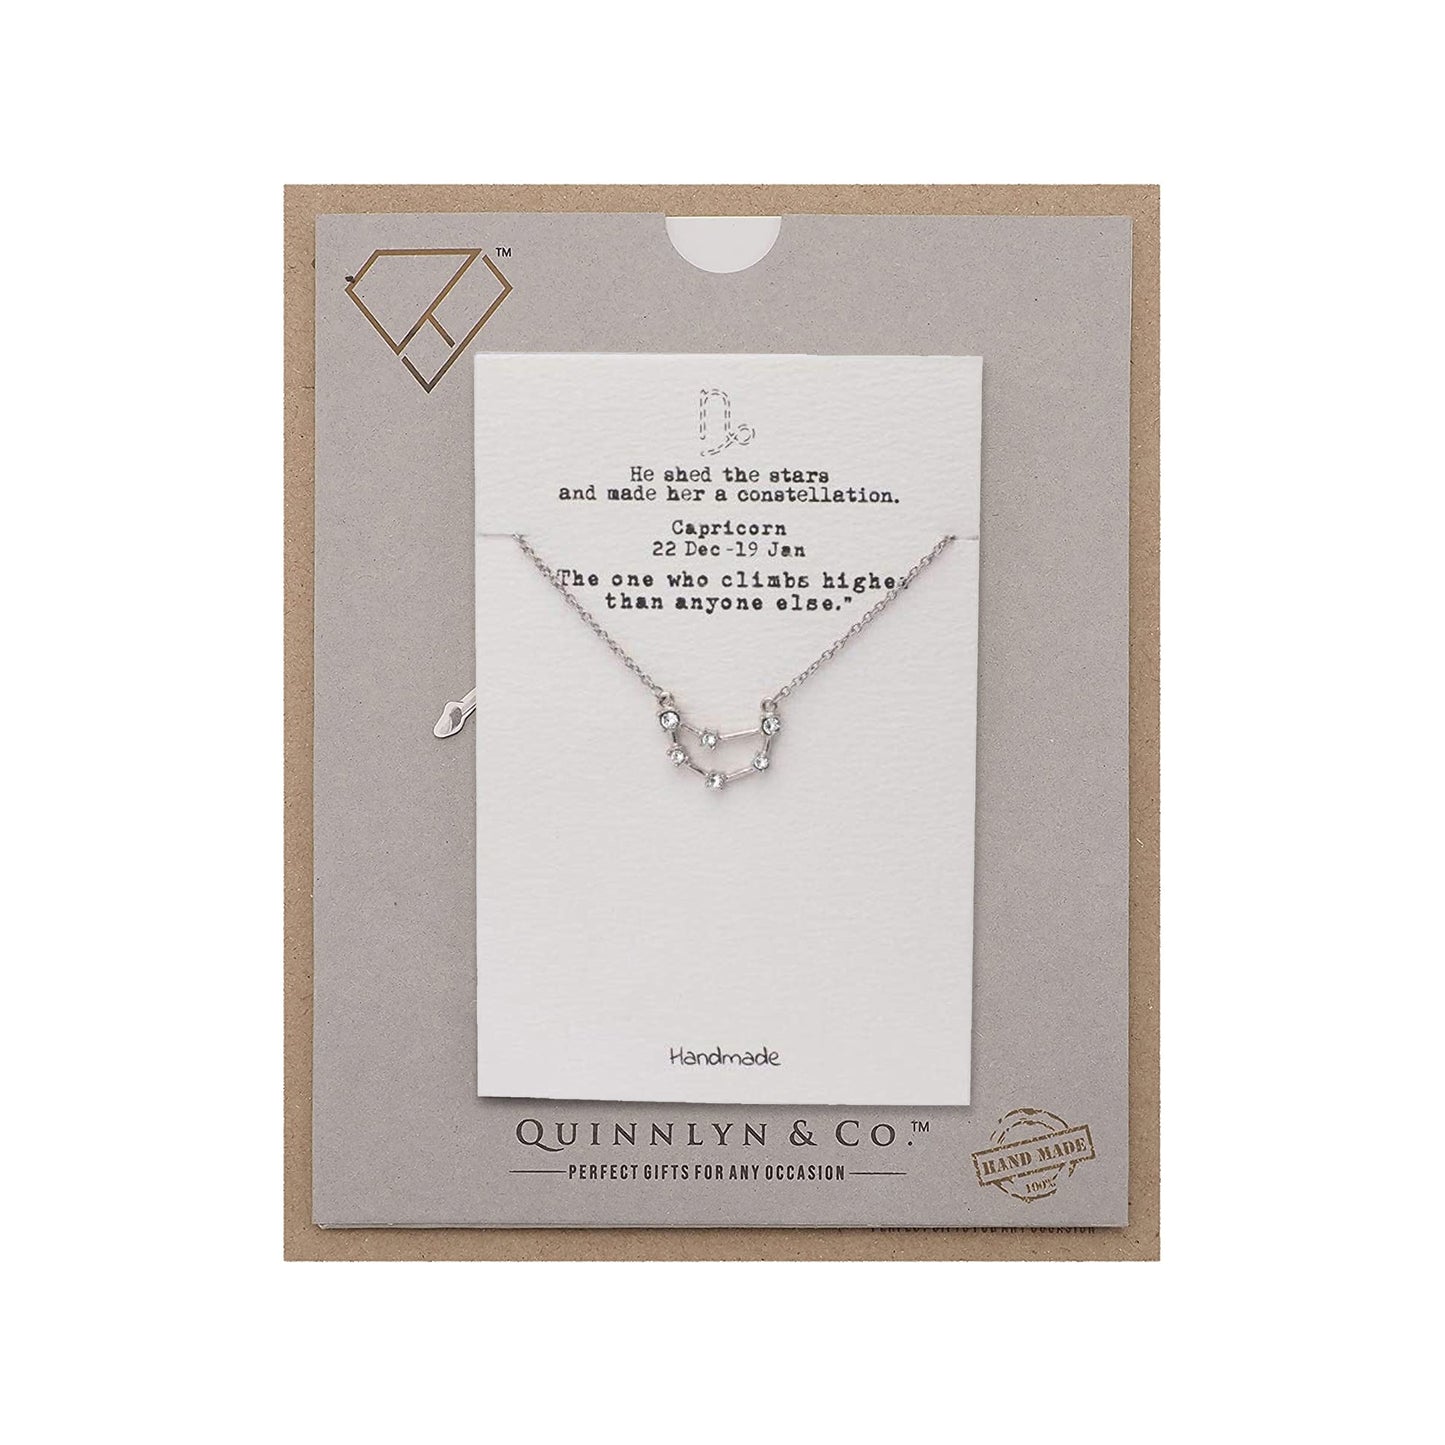 Quinnlyn & Co. Capricorn Zodiac Pattern Swarovzki Pendant Necklace, Birthday Gifts for Women, Teens and Girls with Inspirational Greeting Card